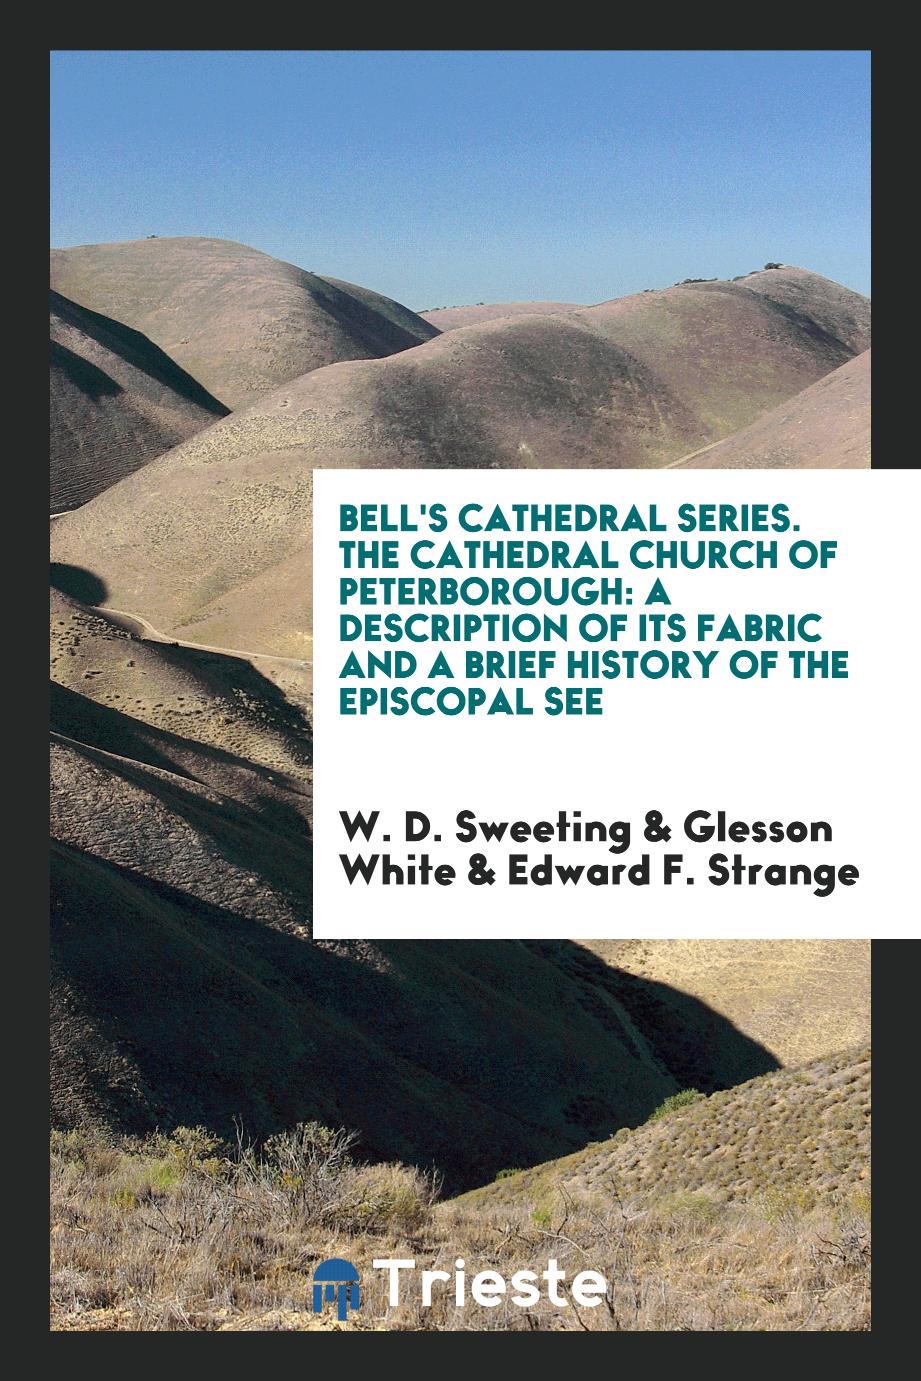 Bell's Cathedral Series. The Cathedral Church of Peterborough: A Description of Its Fabric and a Brief History of the Episcopal See